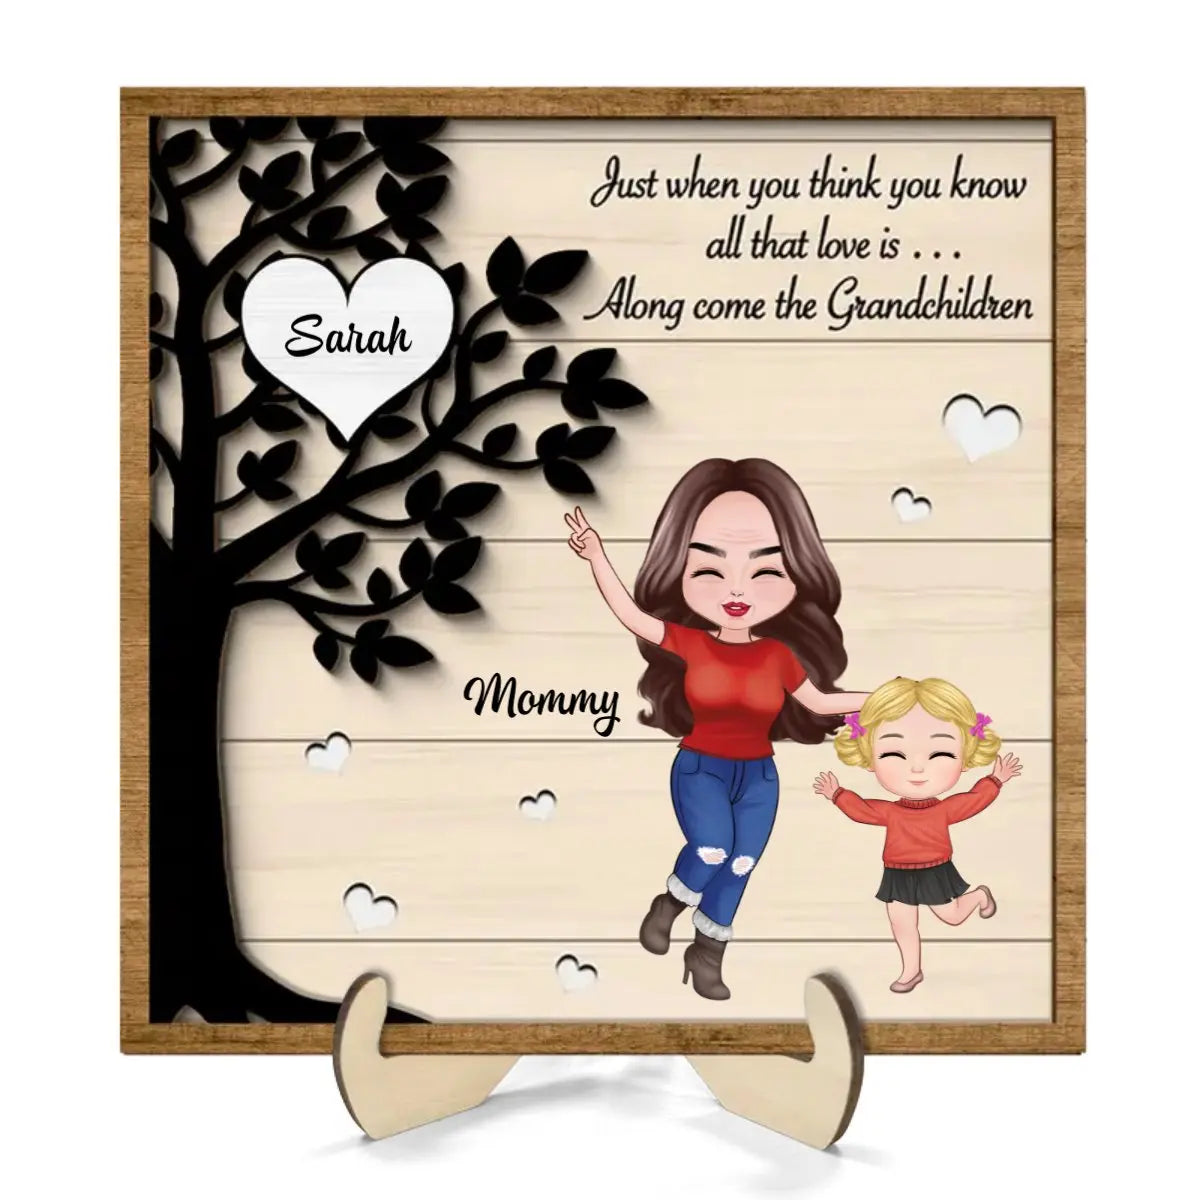 Family - Love Come Along With Grandchildren Heart Tree - Personalized Wooden Plaque